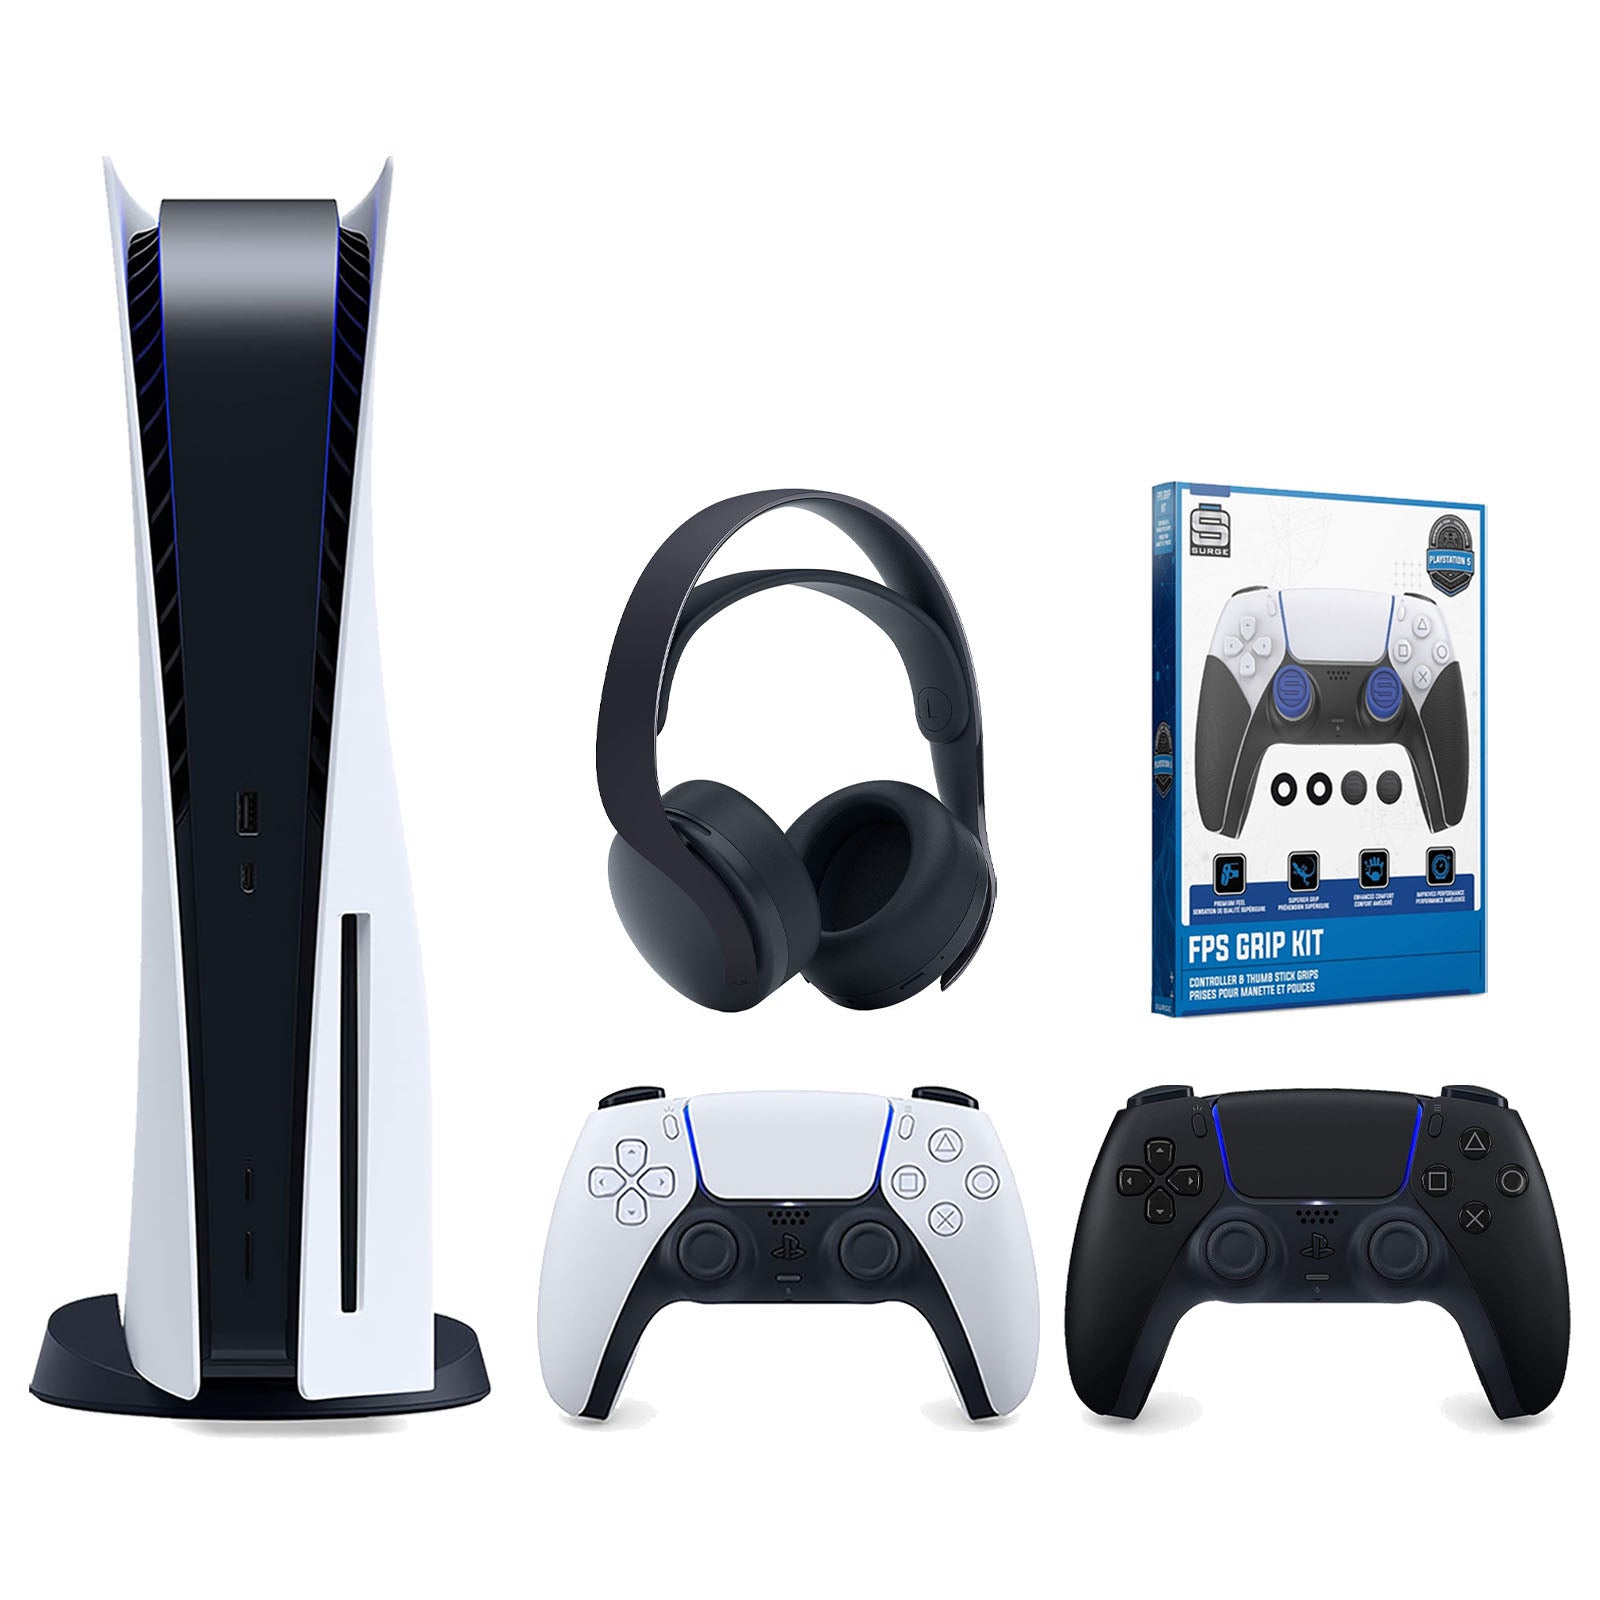 Sony Playstation 5 Disc Version Console with Extra Black Controller, Black PULSE 3D Headset and Surge FPS Grip Kit With Precision Aiming Rings Bundle - Pro-Distributing